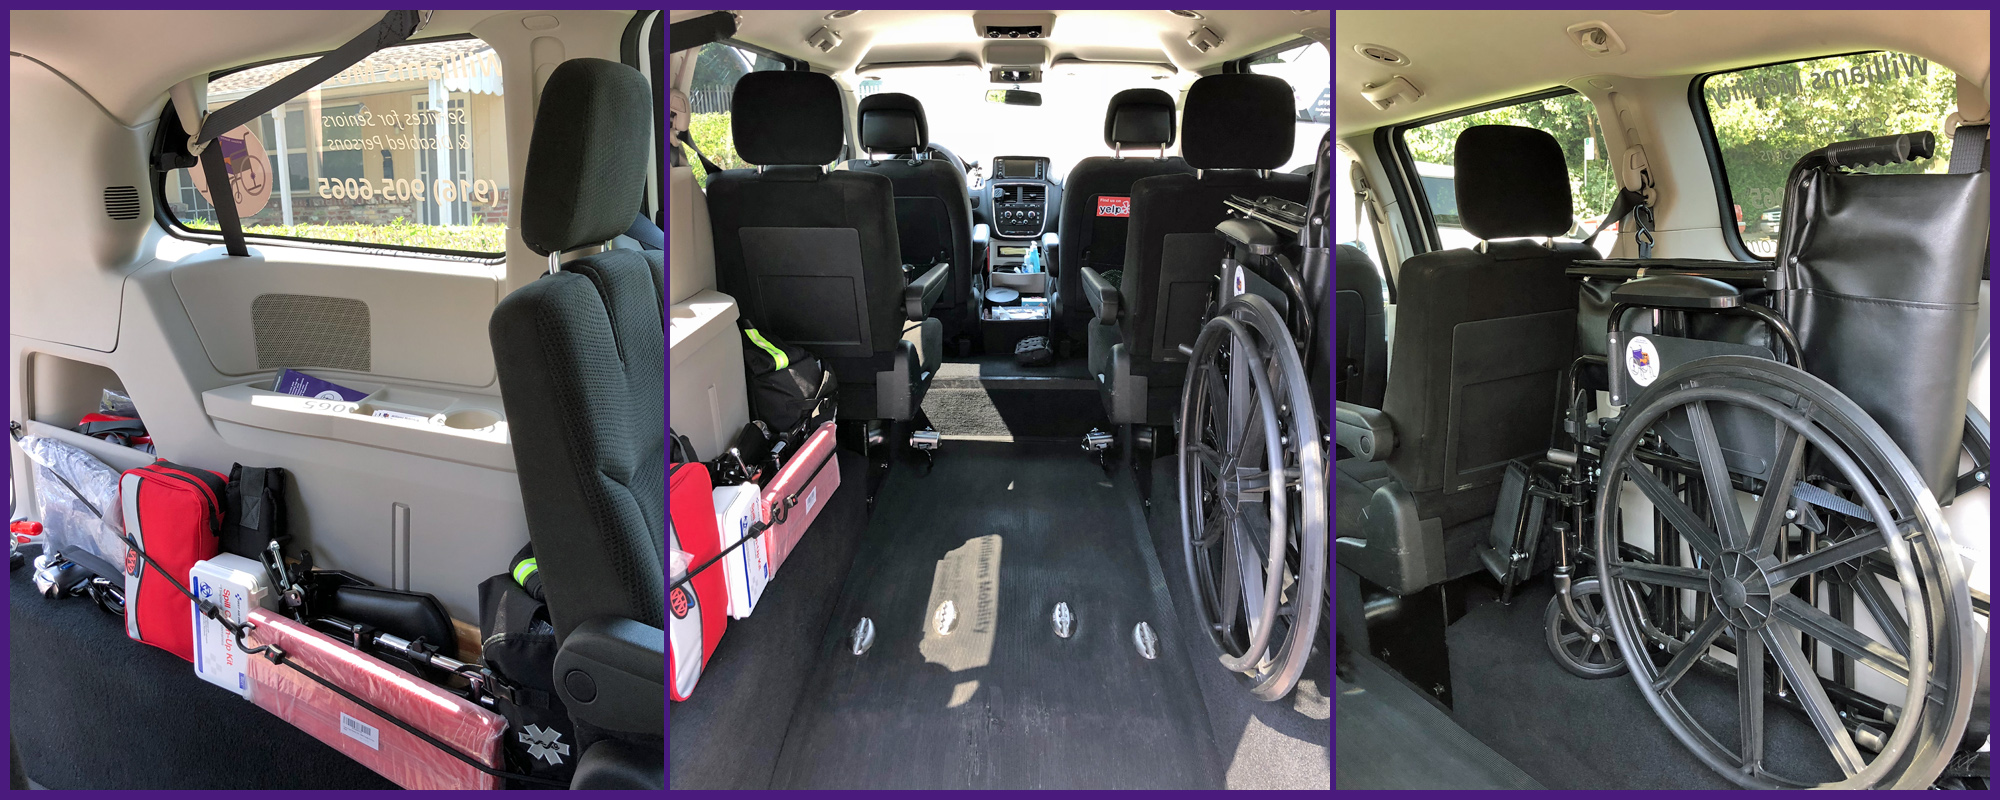 Williams Mobility vans are fully stocked with every item we might need during a transport.